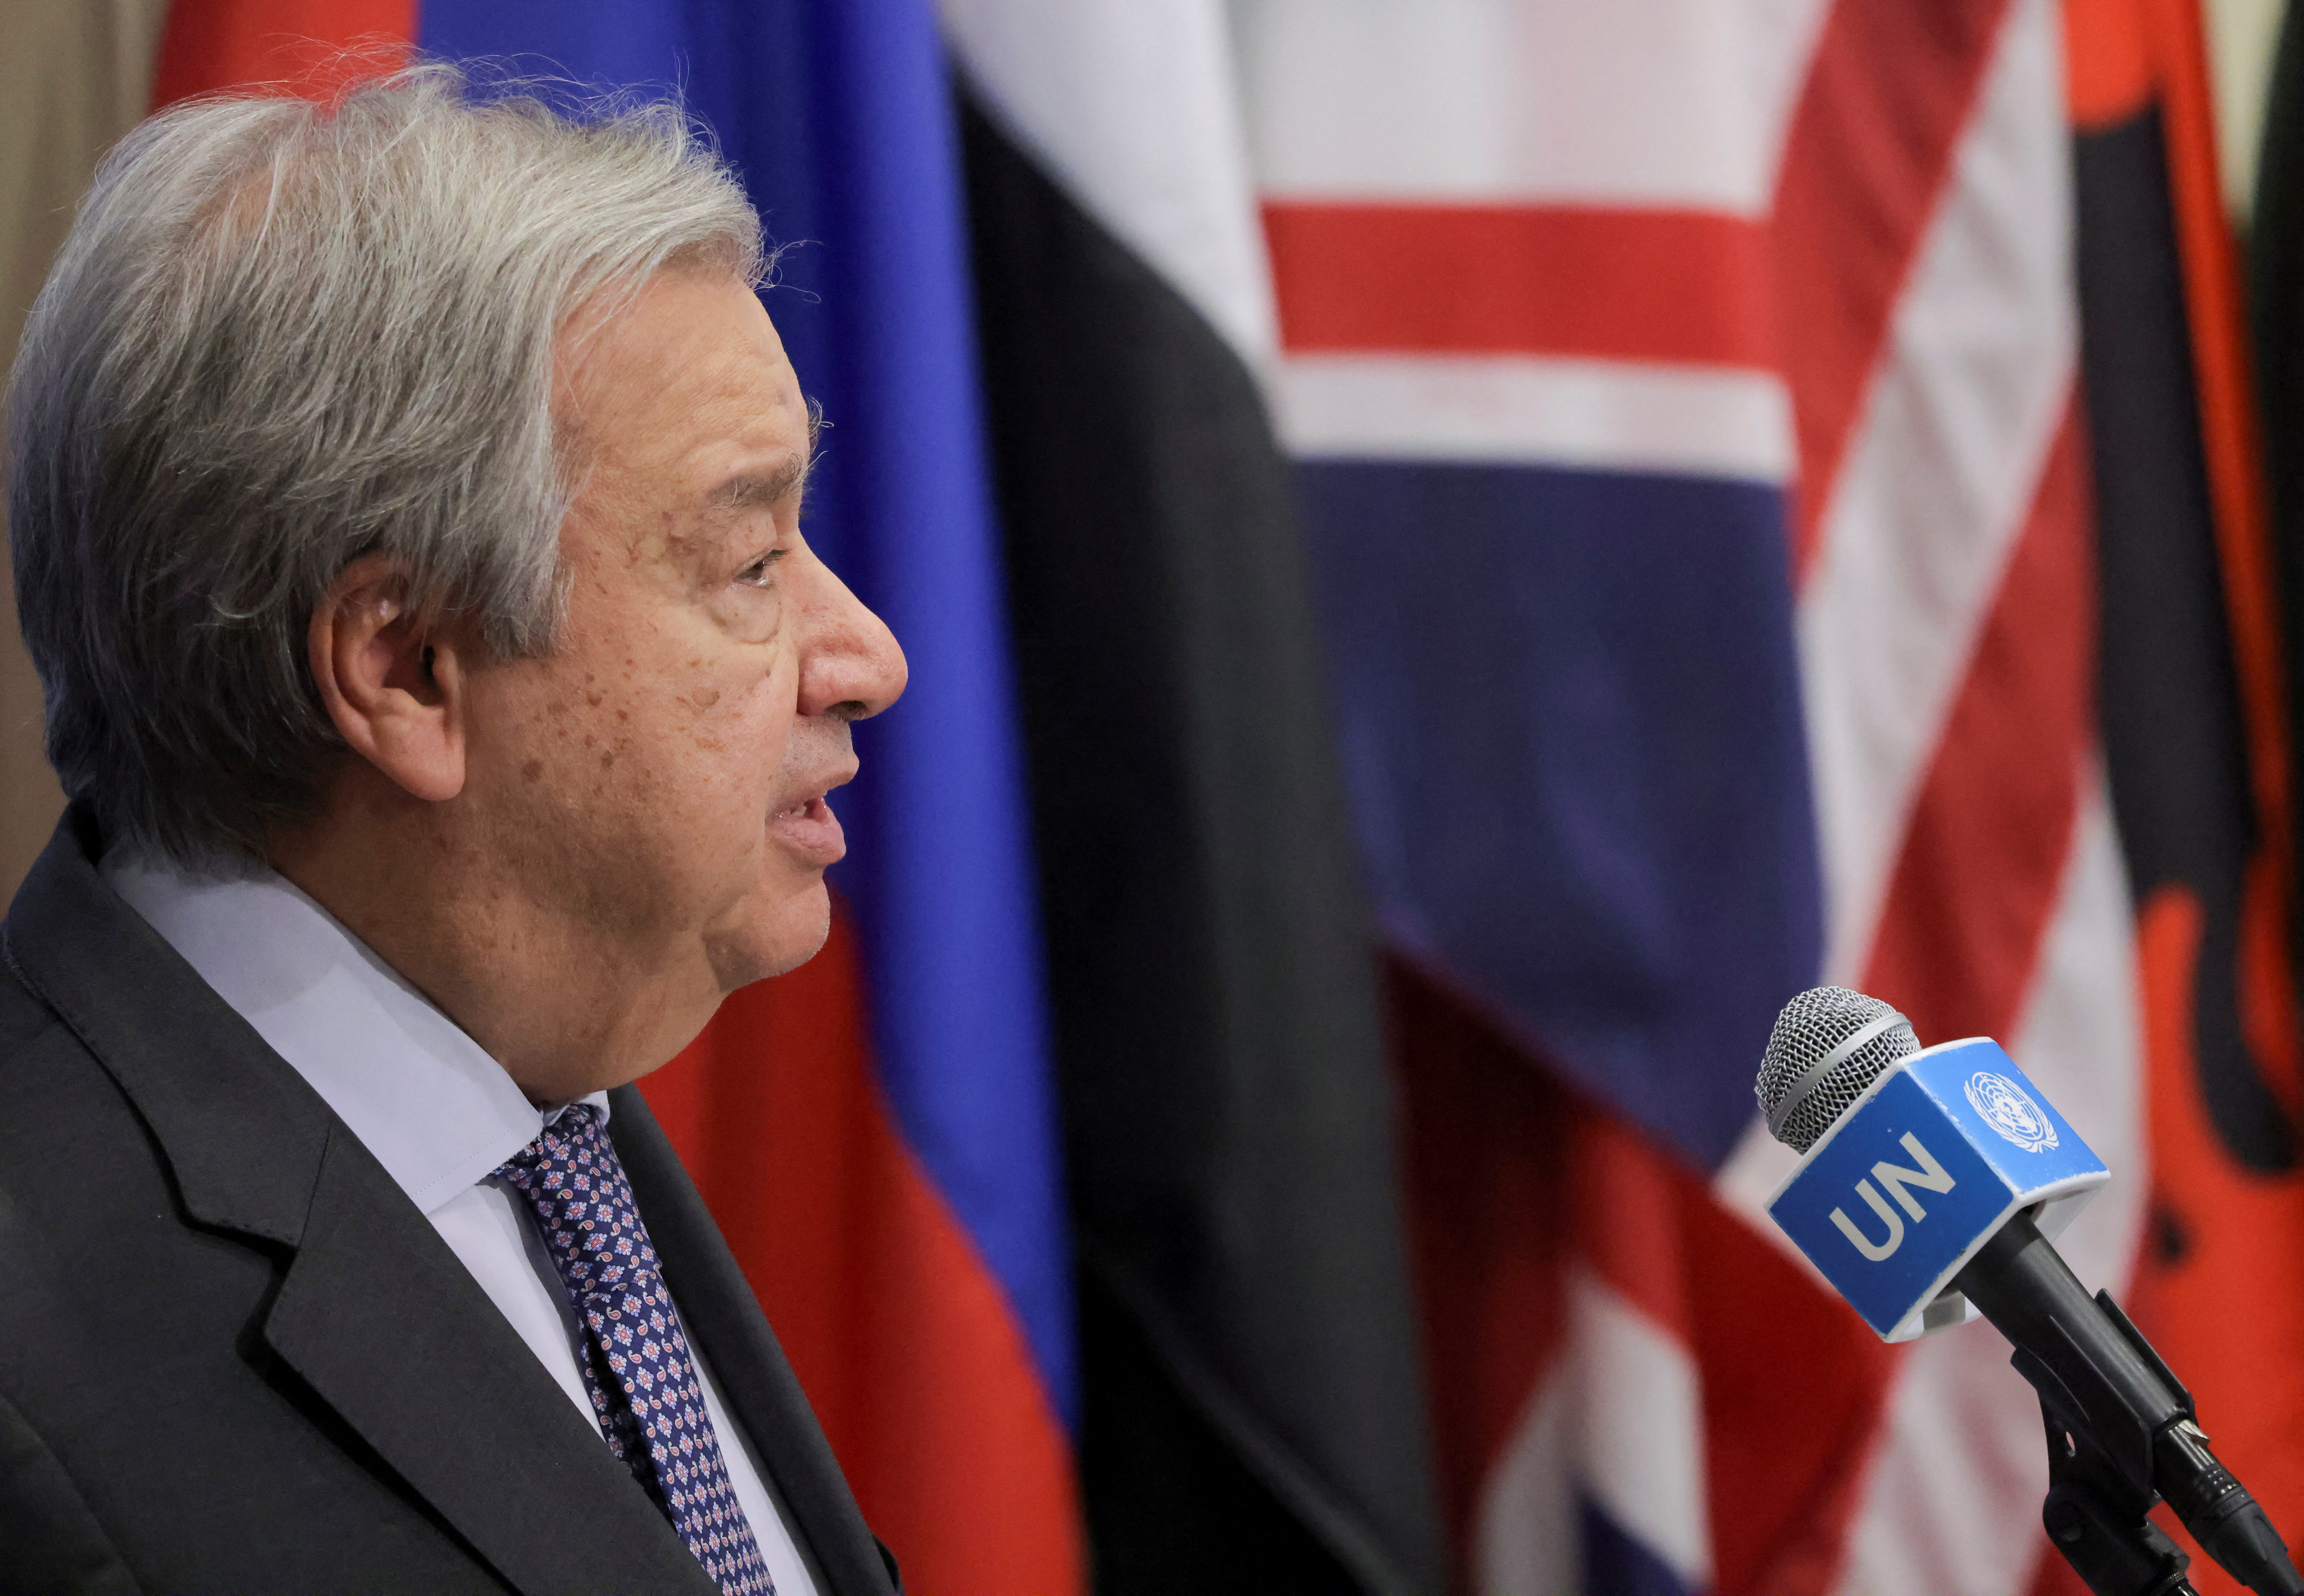 UN Secretary General Guterres speaks to members of the press at the UN Headquarters in New York City